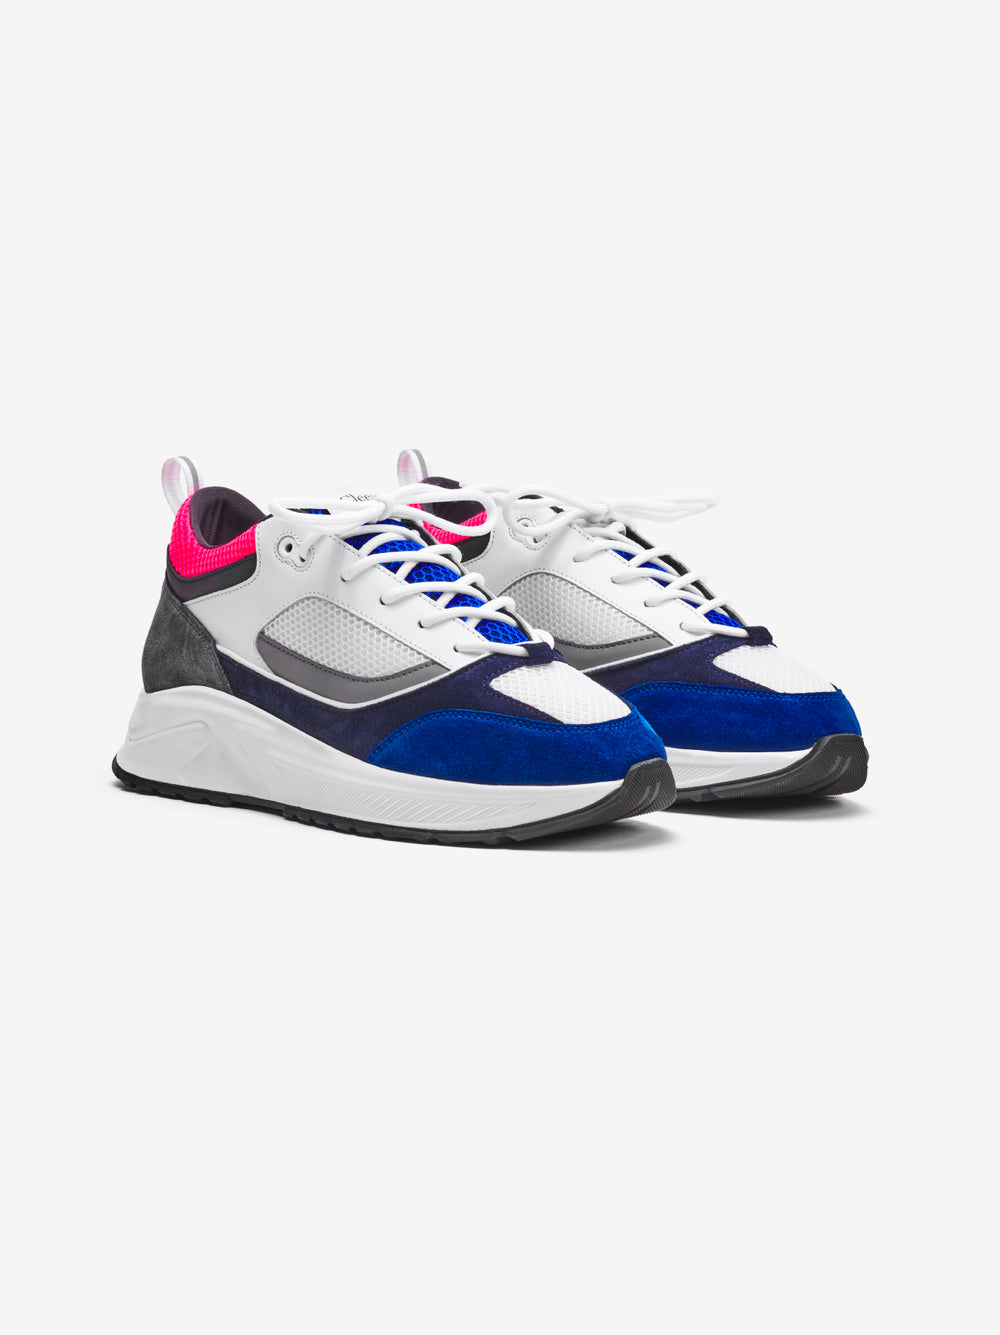 Essential Runner White Pink Royal-2